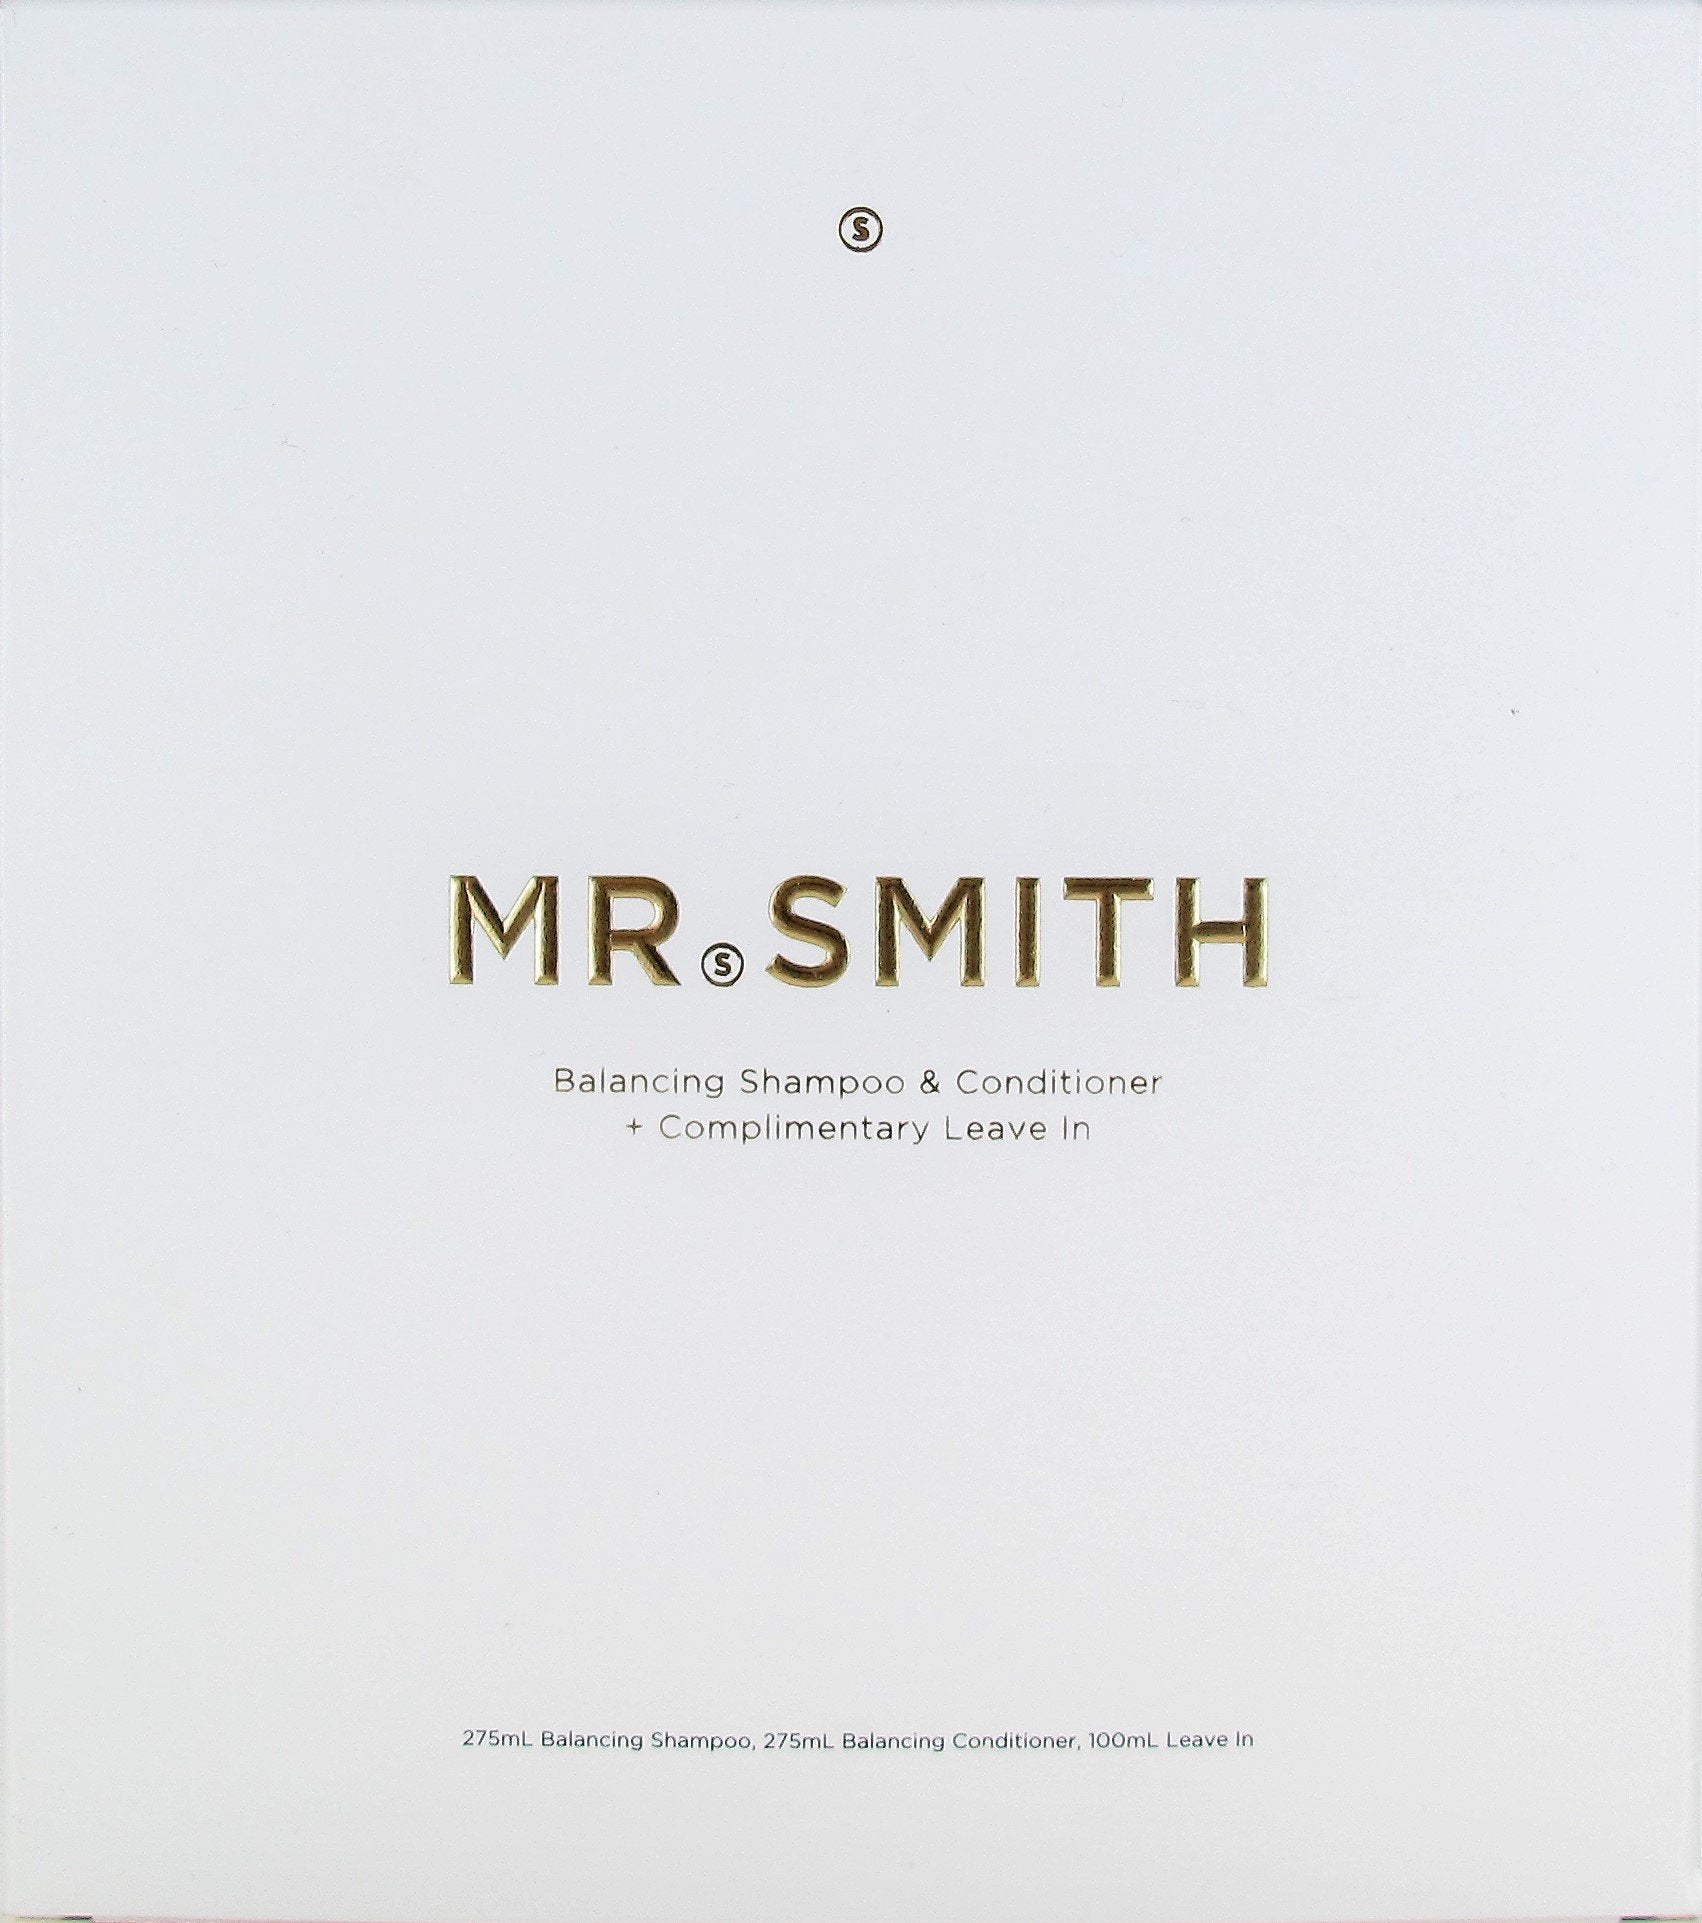 Mr. Smith Balancing Shampoo & Conditioner + Leave-in Set